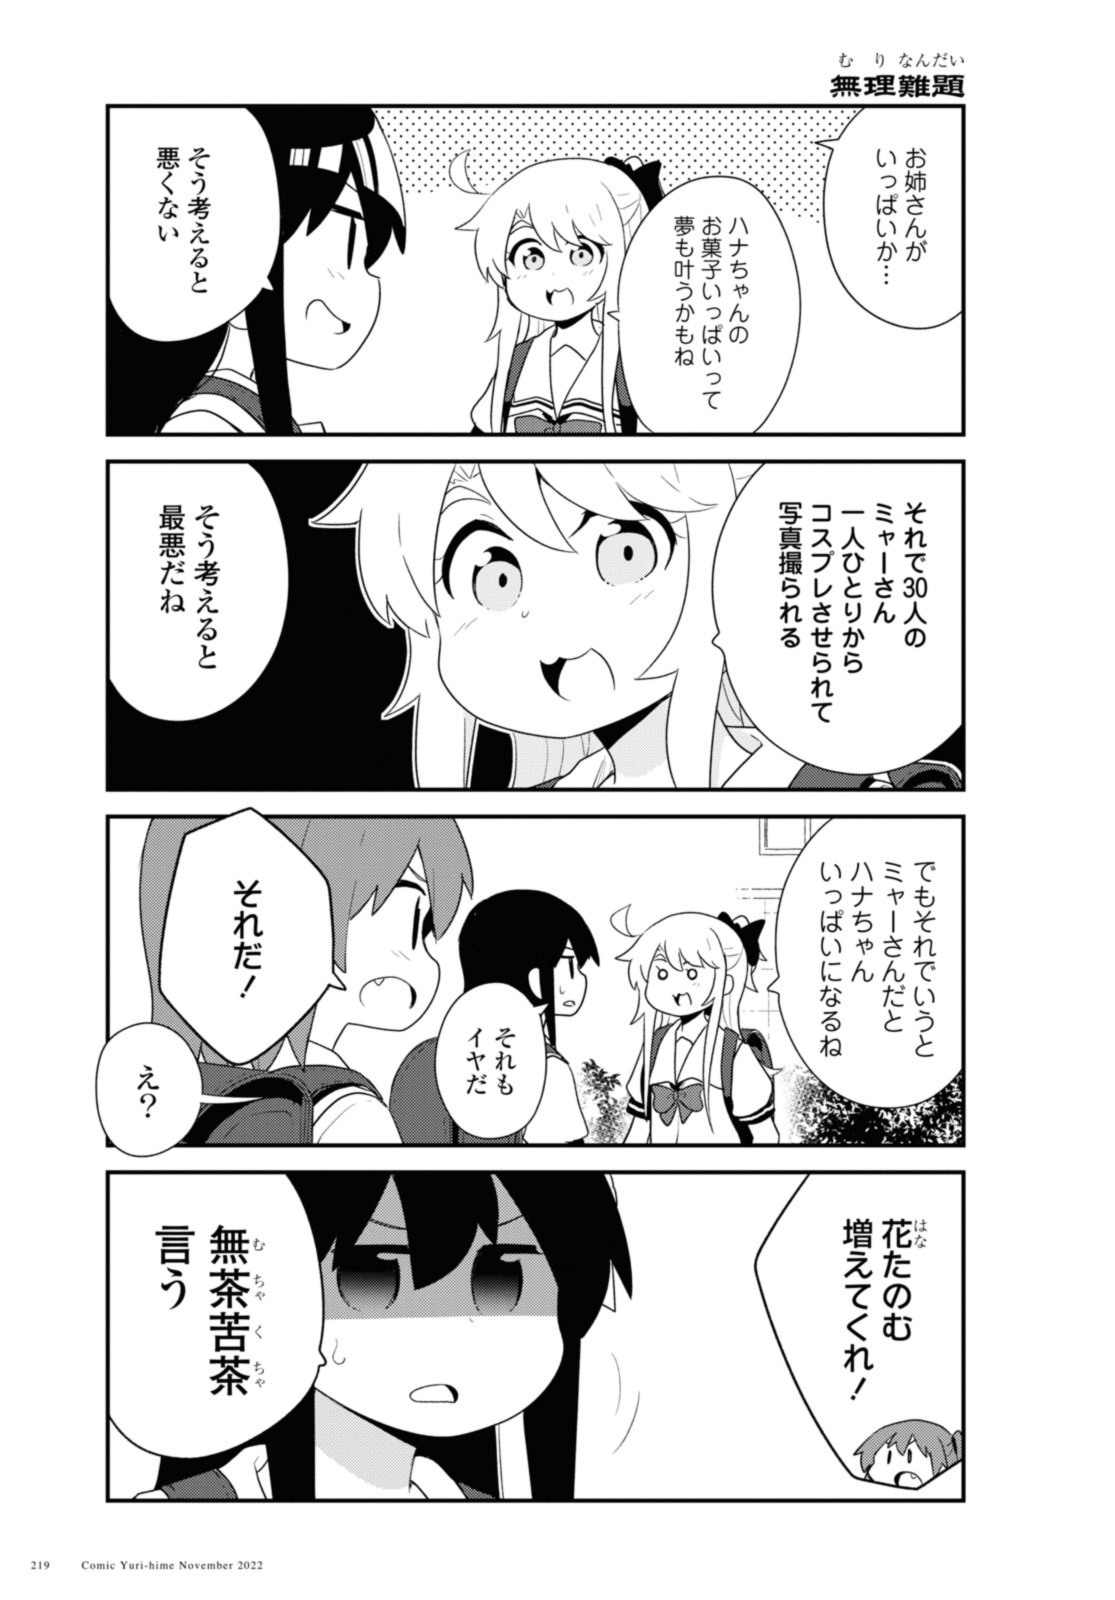 Wataten! An Angel Flew Down to Me 私に天使が舞い降りた！ 第99話 - Page 7